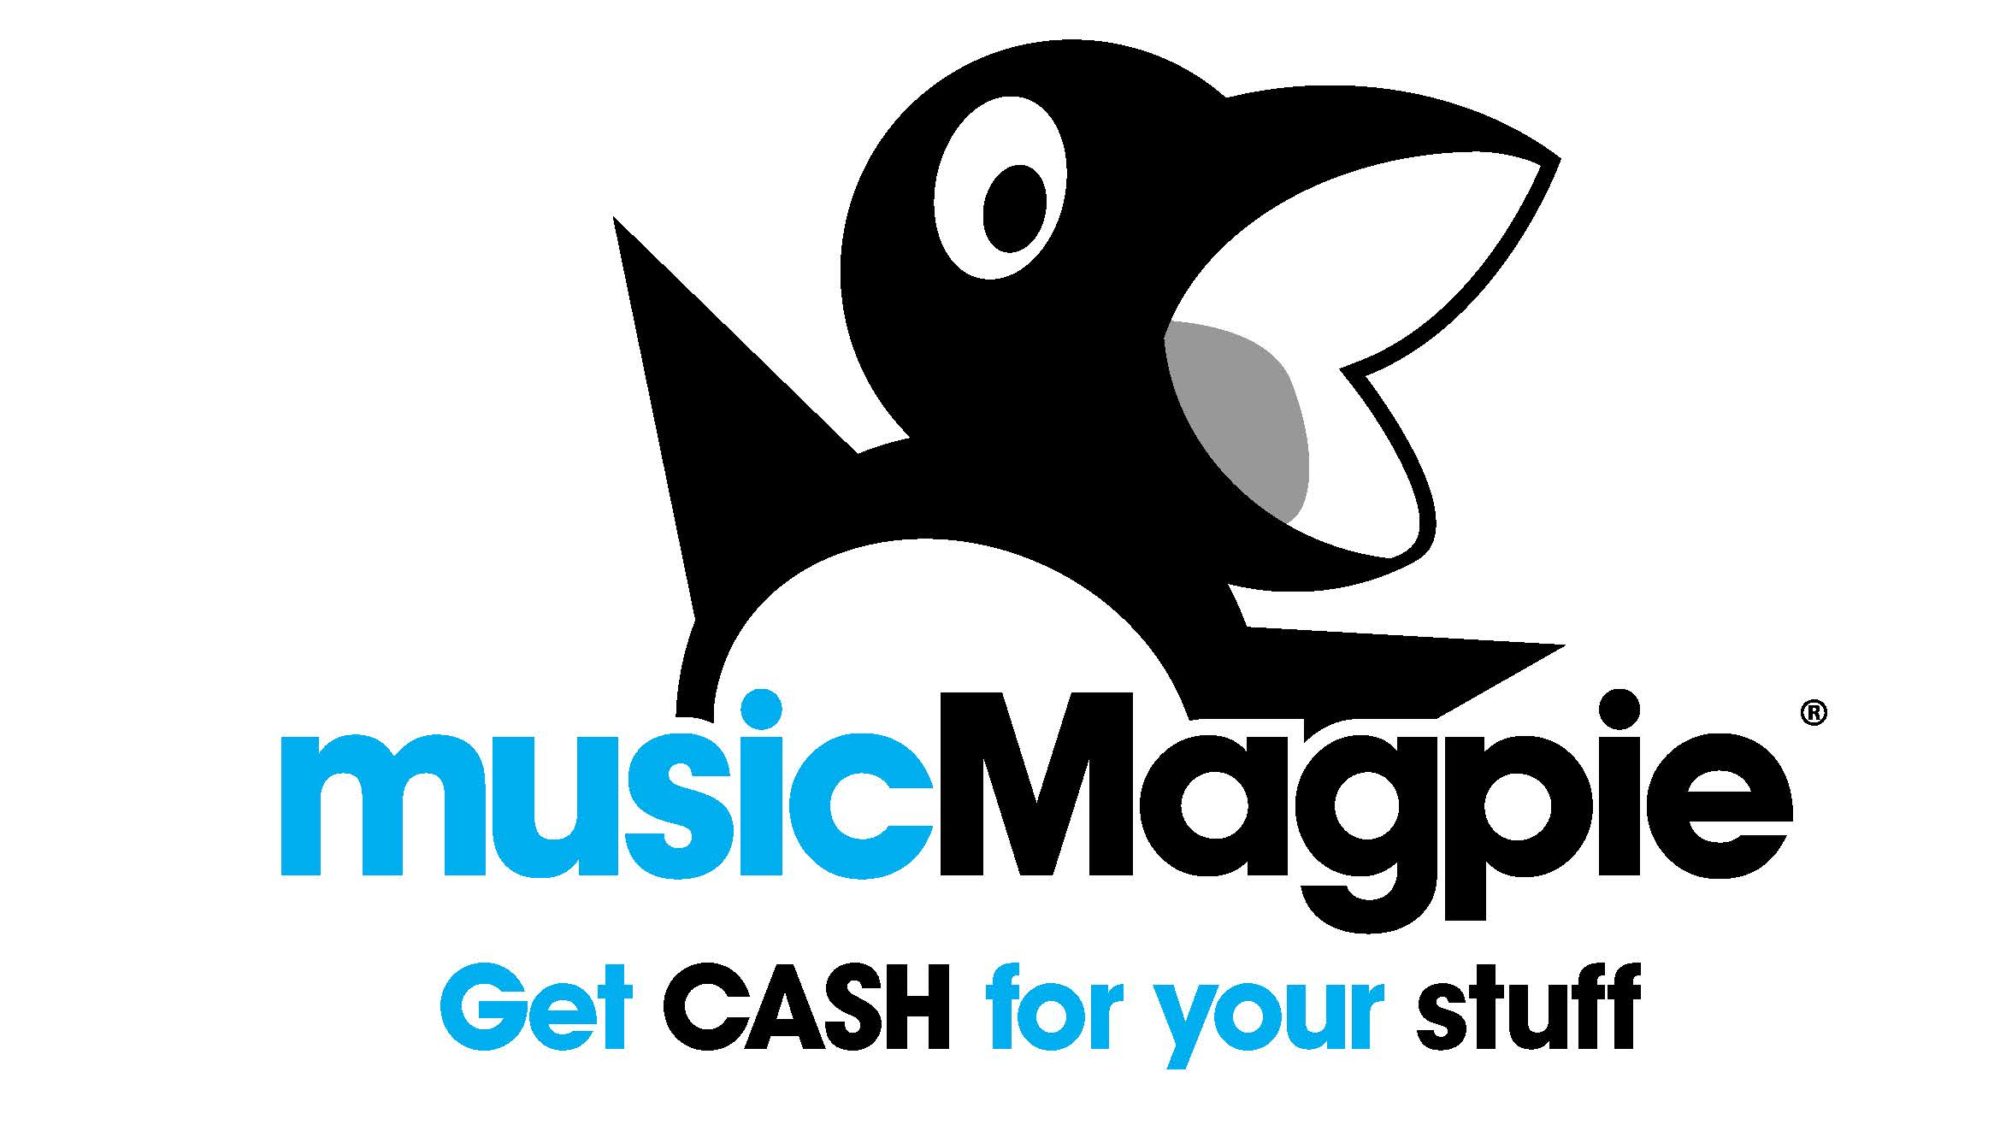 Leighton resigns from Music Magpie board